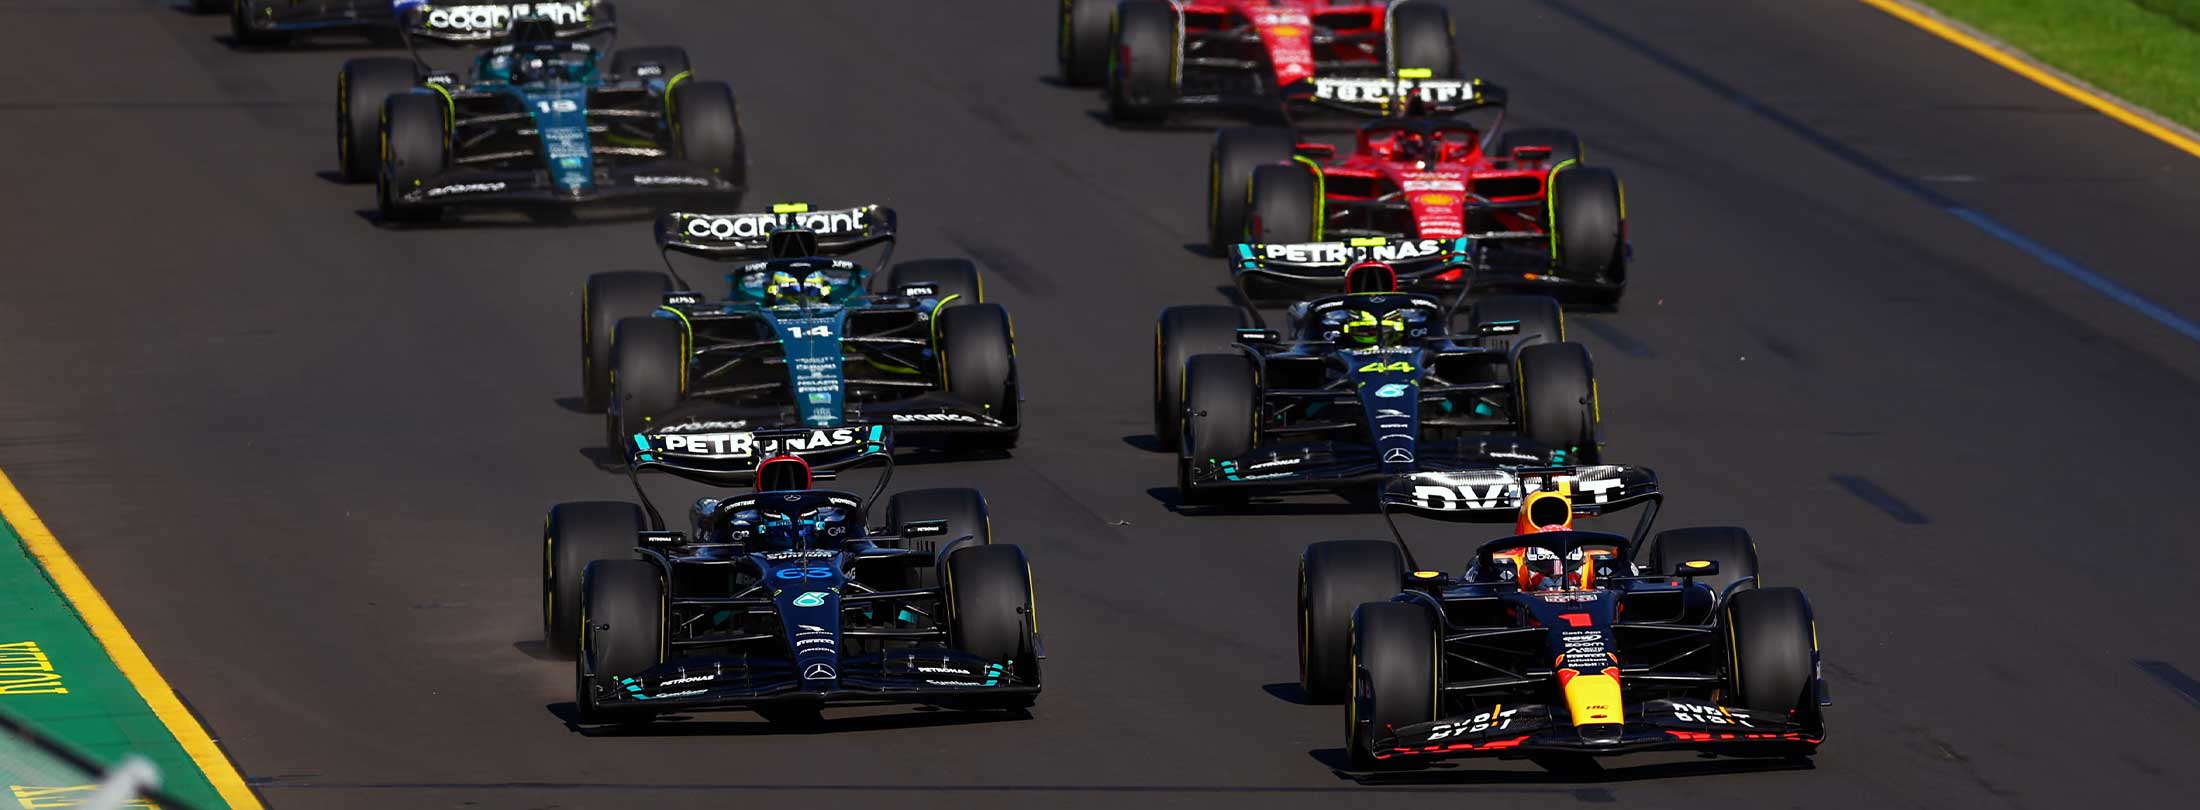 F1’s Proposed Points System Overhaul Gains Momentum